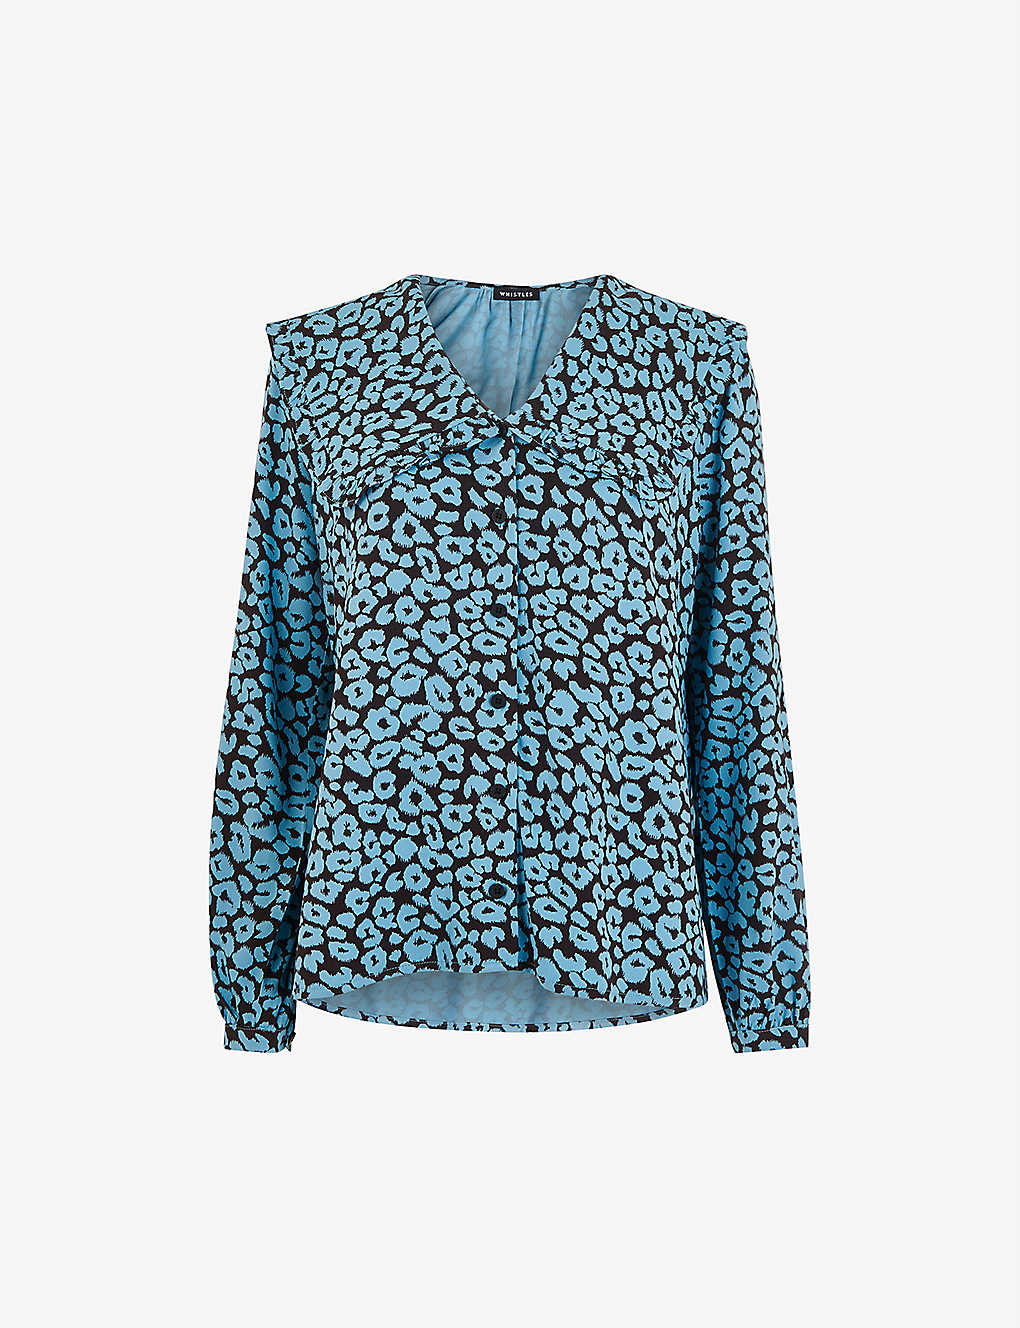 Whistles Fuzzy Leopard Collared Top In Multi-coloured